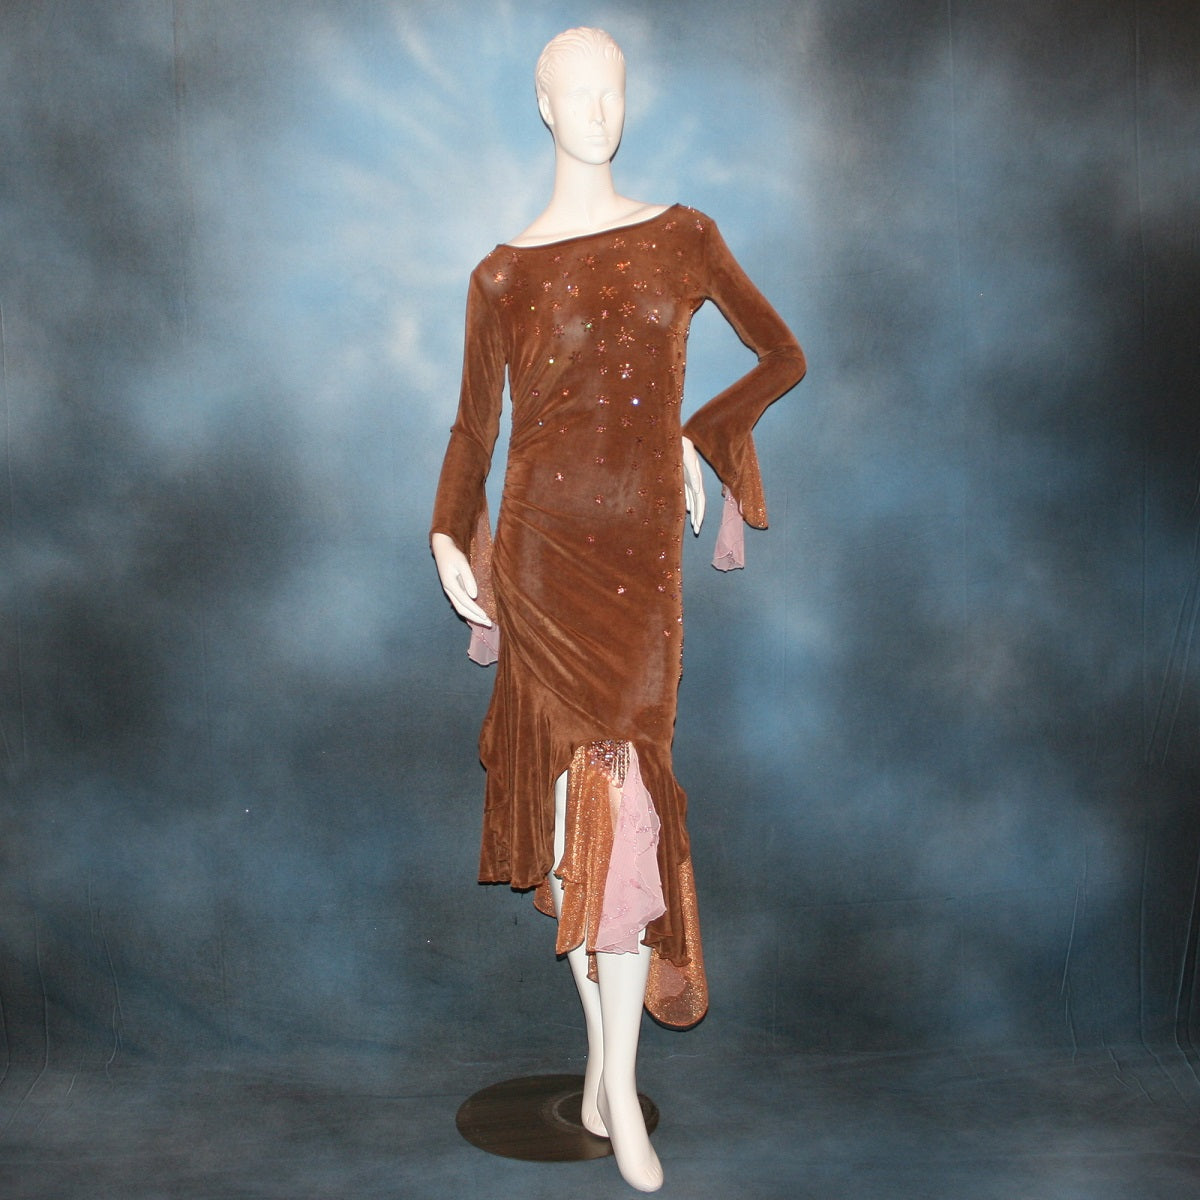 Latin/rhythm dress created of luxurious solid slinky in cinnamon brown with accents of bronze & soft pink is lavishly embellished with Swarovski 